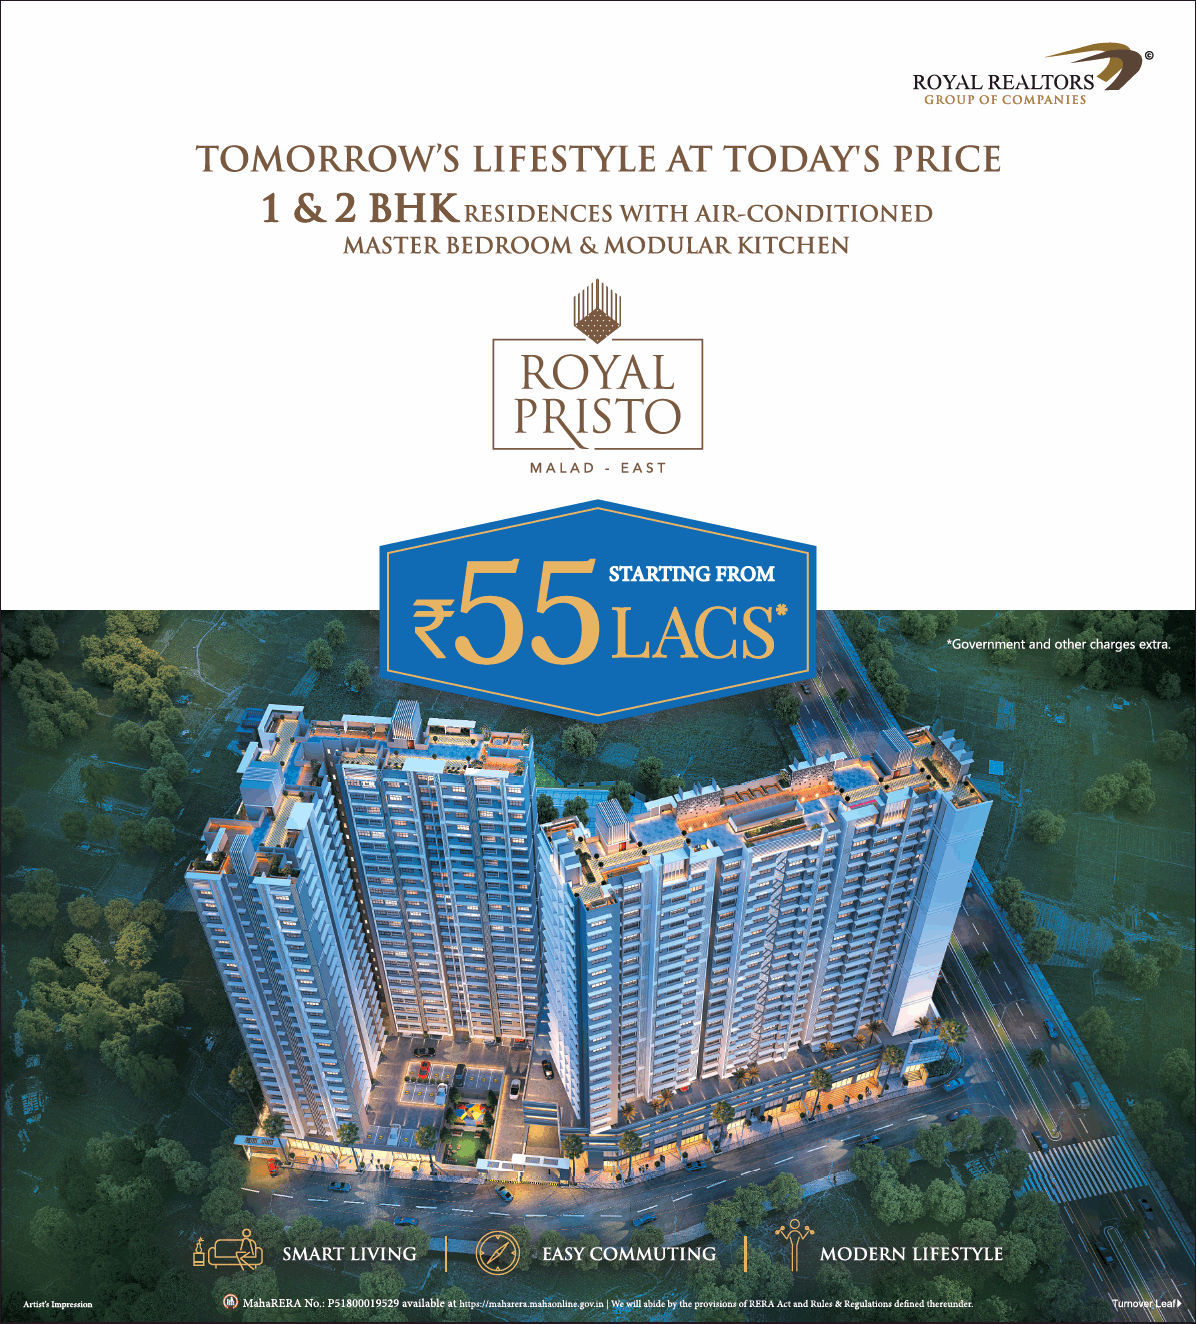 Introducing tomorrows lifestyle at today's price at Royal Pristo in Mumbai Update